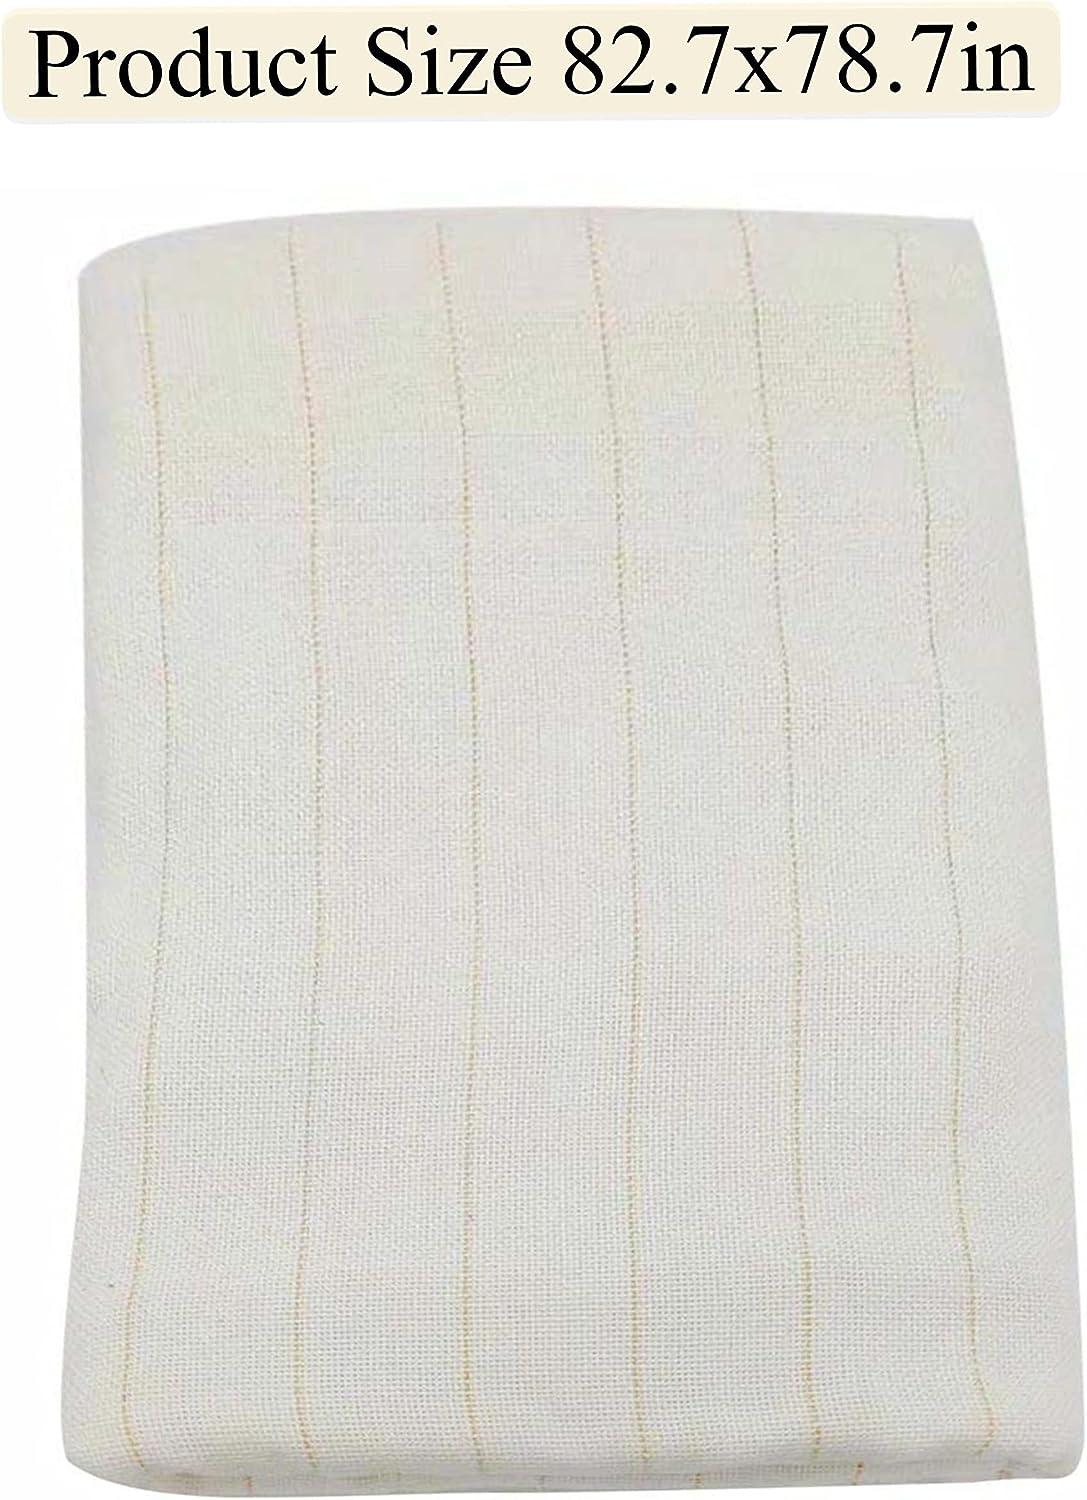 Primary Tufting Cloth 82 x 118 Monks Cloth Tufting Fabric with Marked  Lines Monks Cloth for Punch Needle, Tufting Gun, Rug Punch